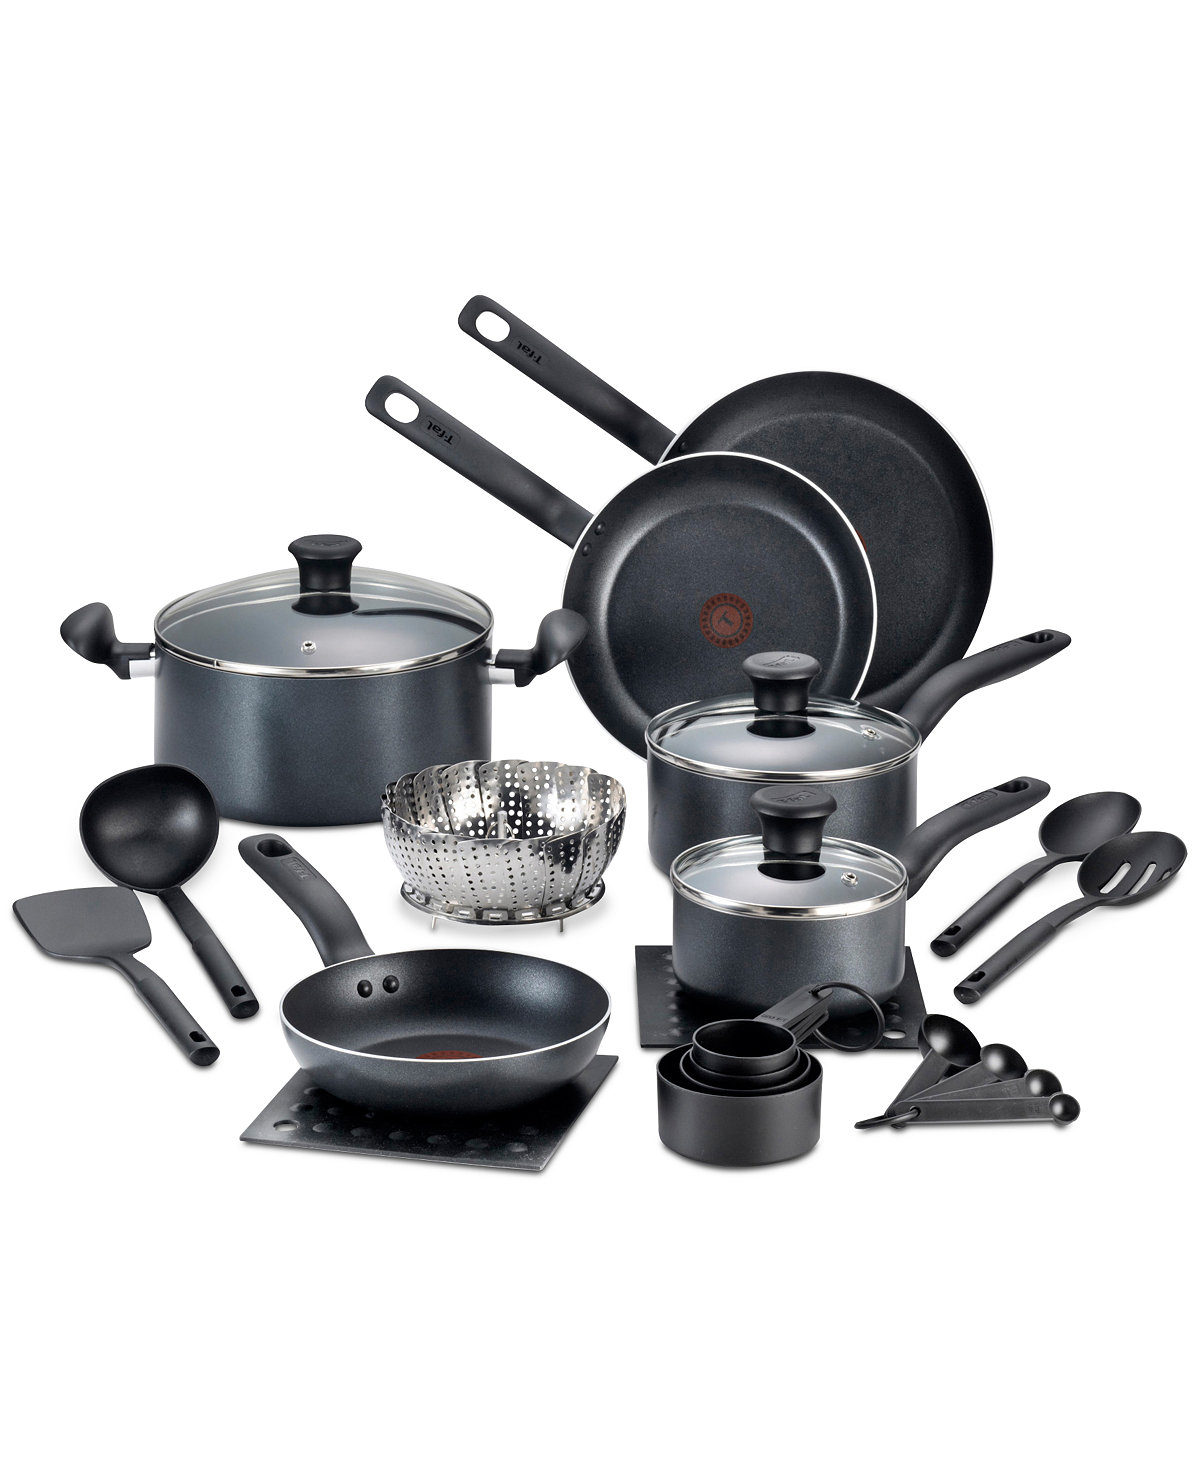 T-Fal 18-piece Initiatives non-stick cookware set for $40